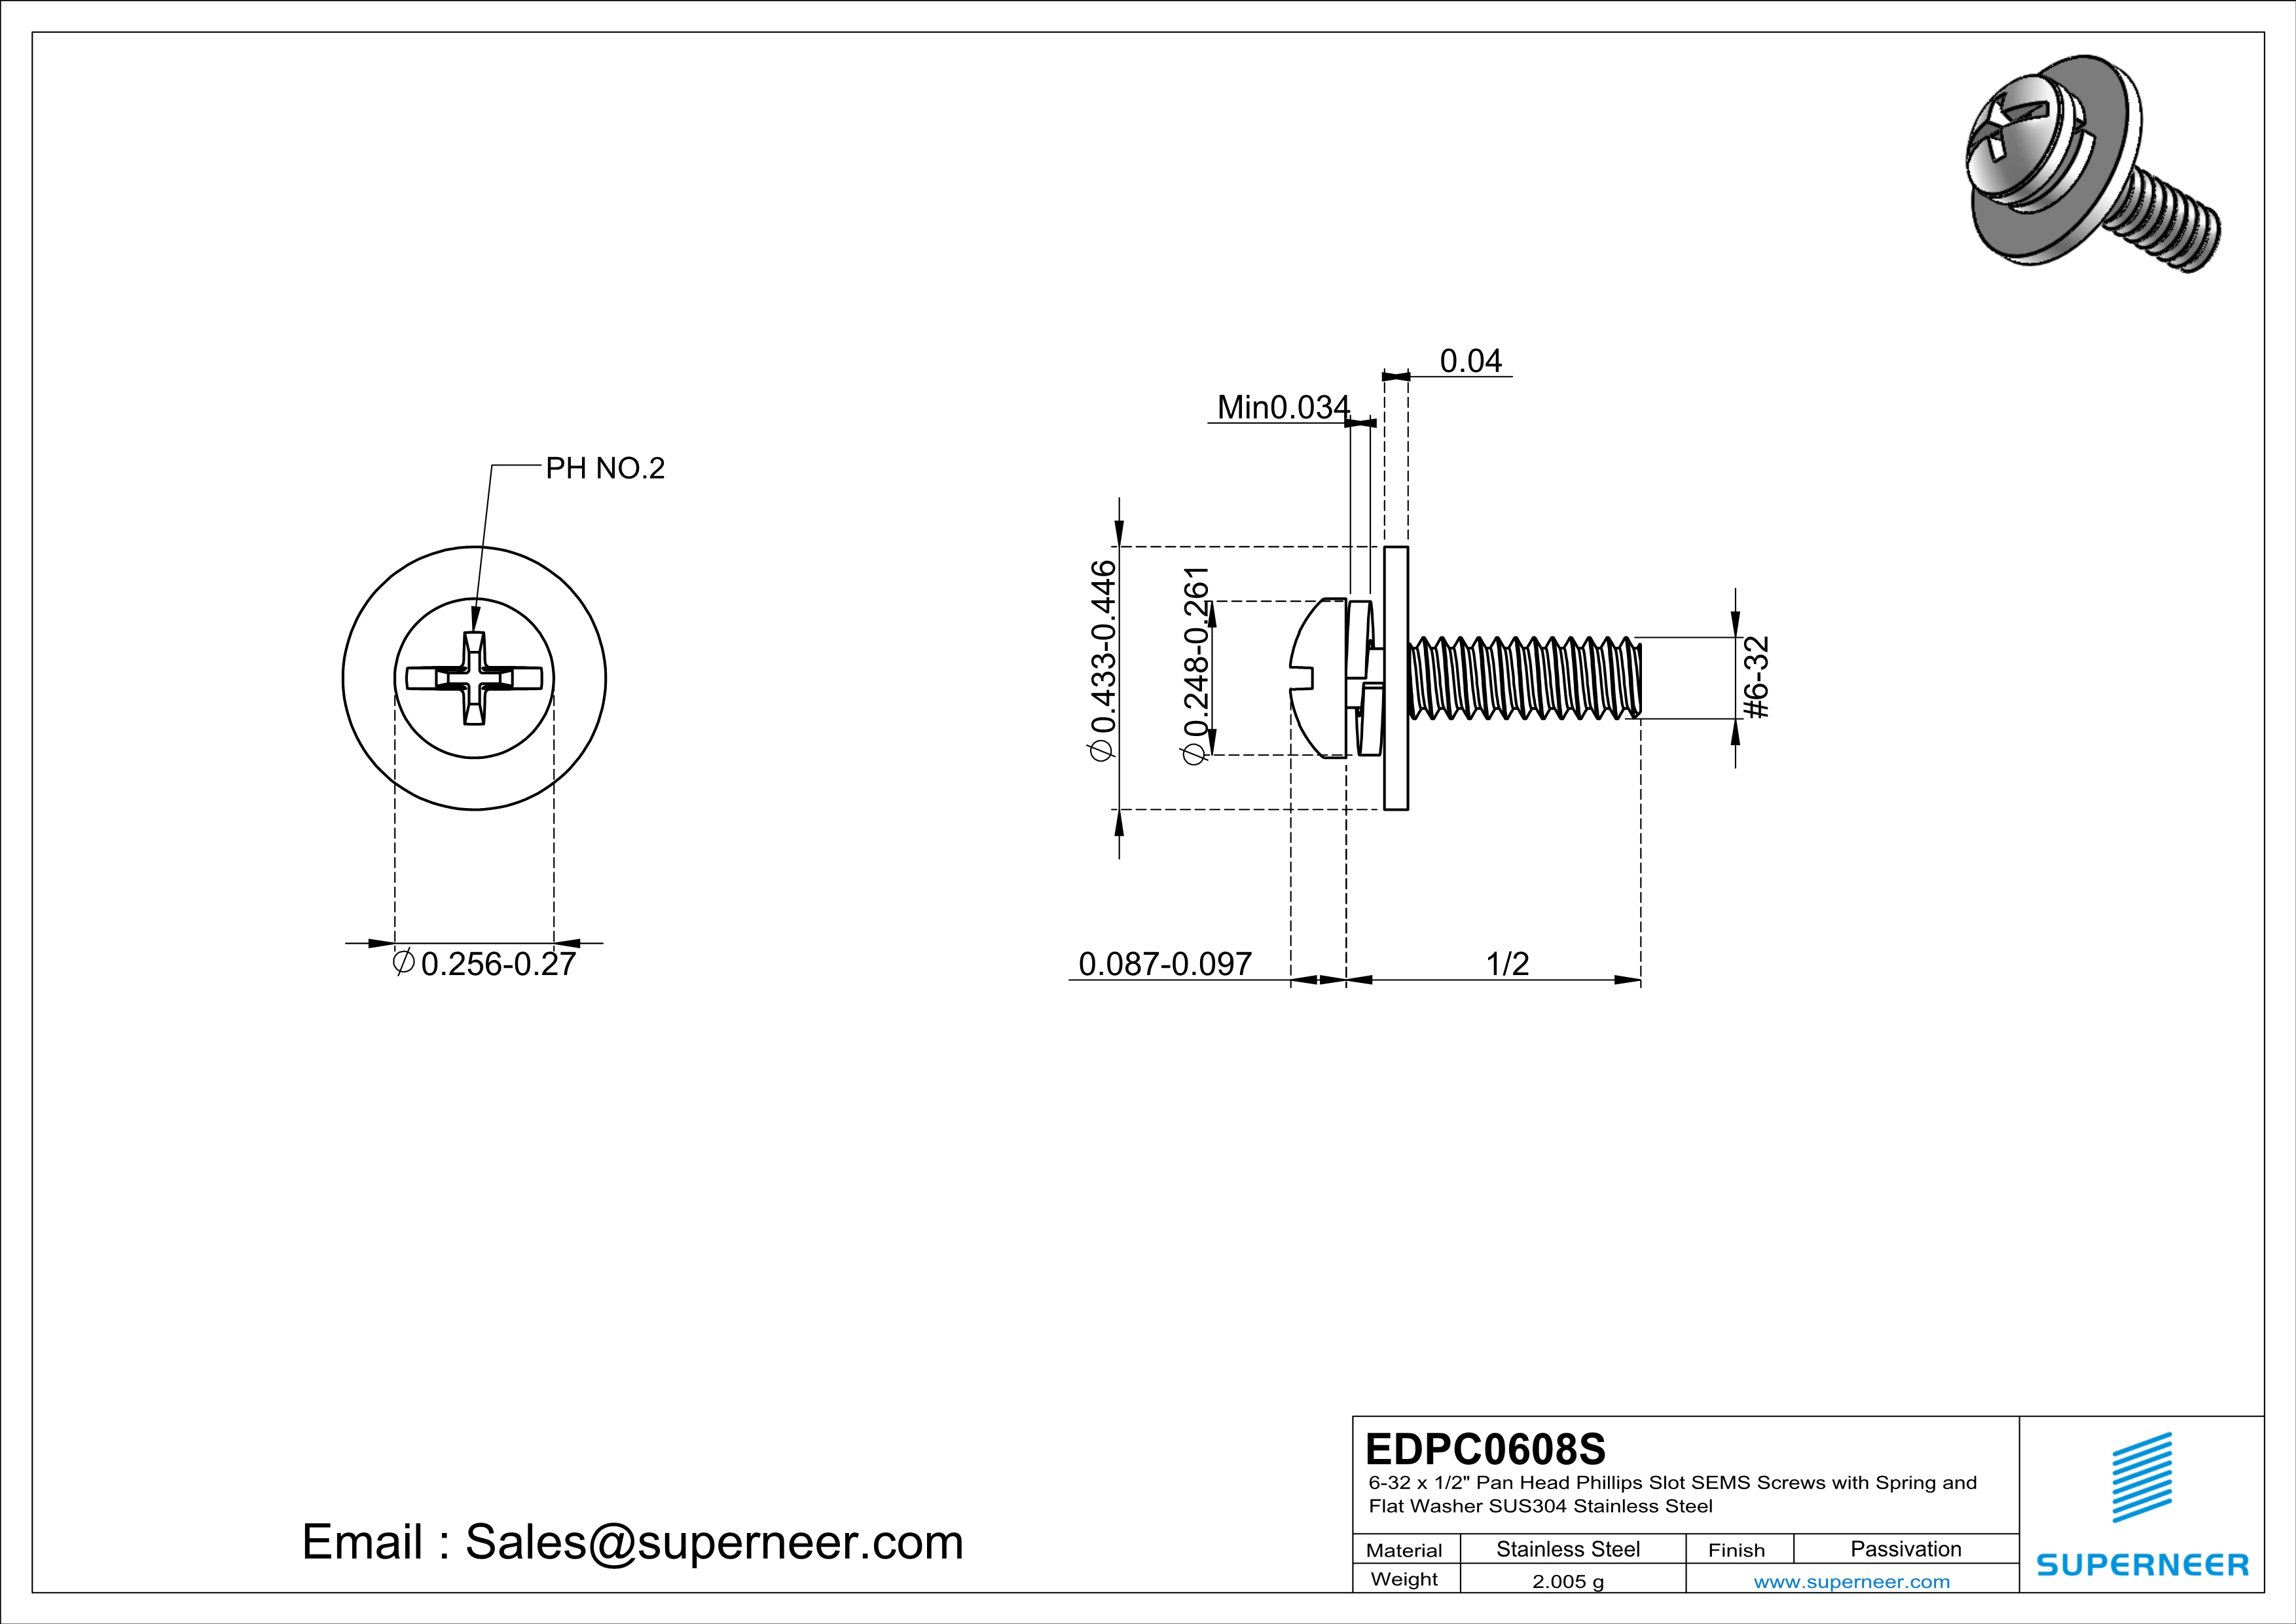 6-32 x 1/2" Pan Head Phillips Slot SEMS Screws with Spring and Flat Washer SUS304 Stainless Steel Inox